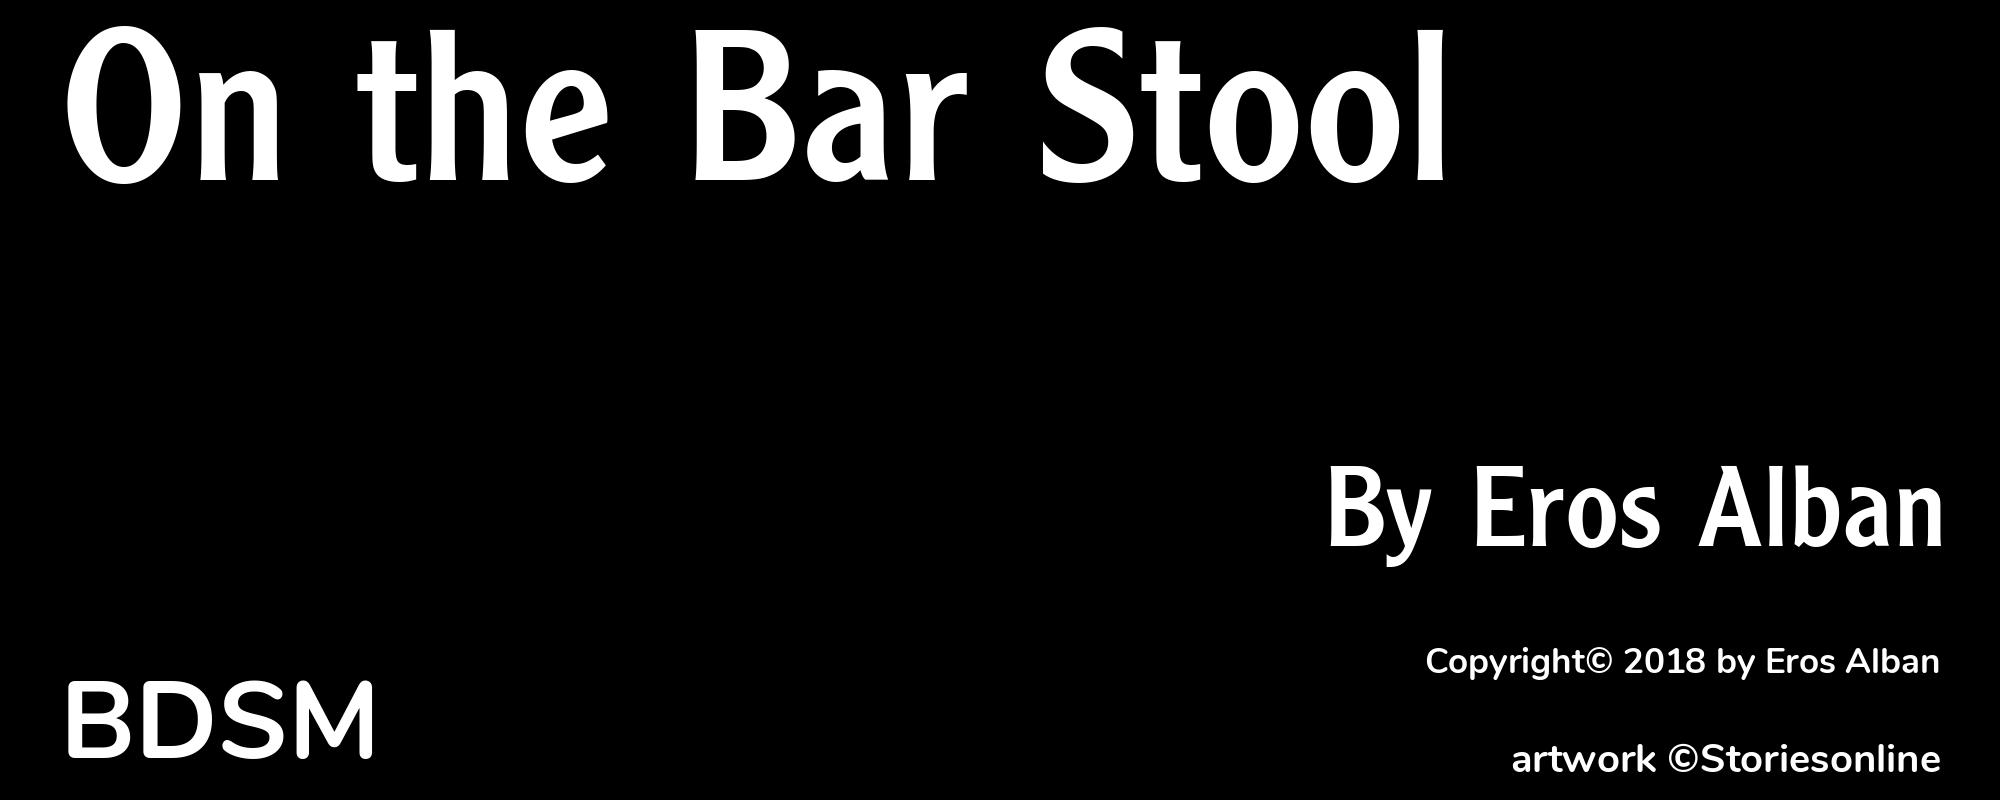 On the Bar Stool - Cover